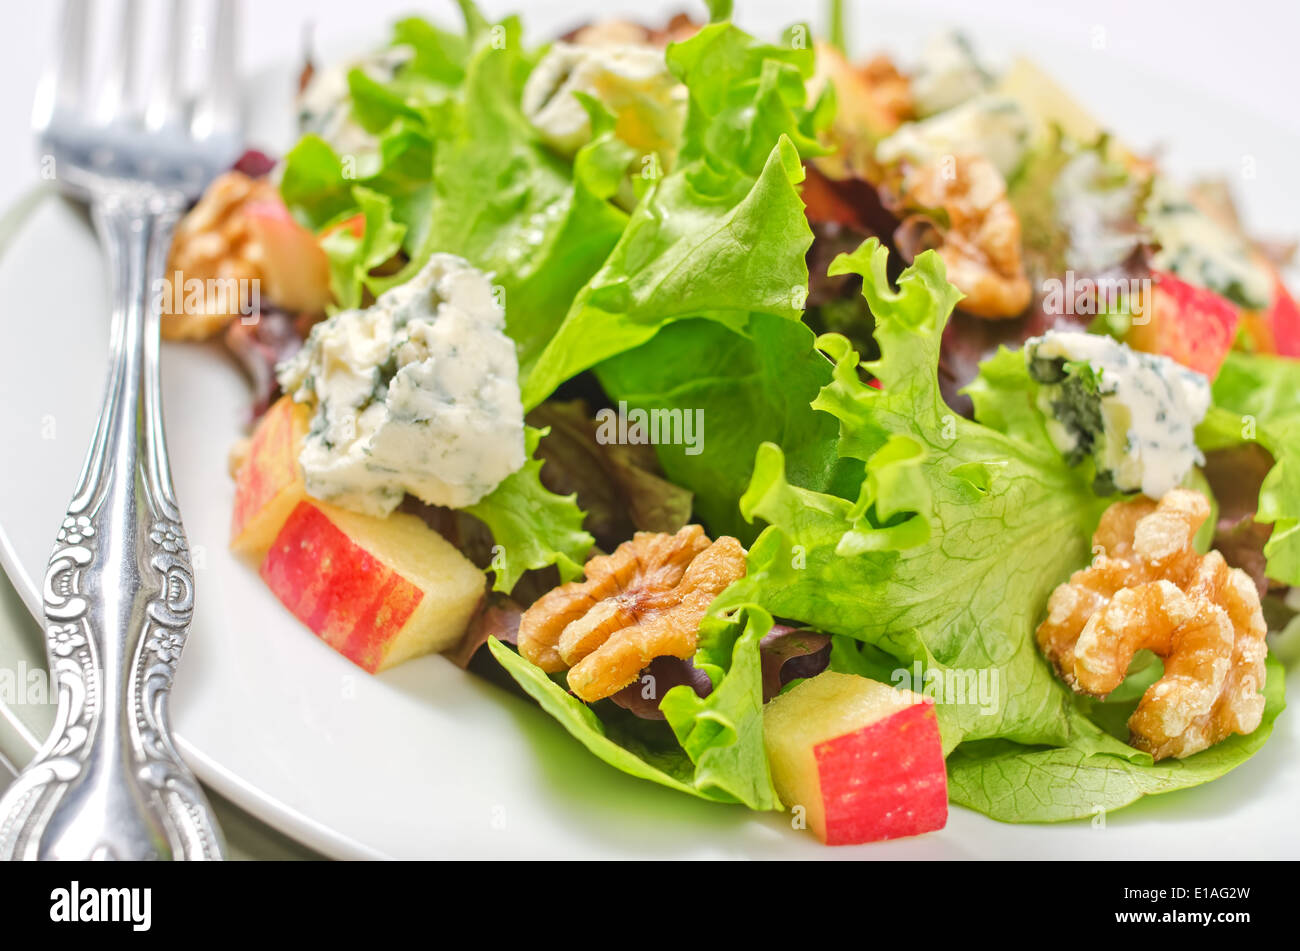 Waldorf salad with greens, apples, walnuts, and blue cheese. Stock Photo